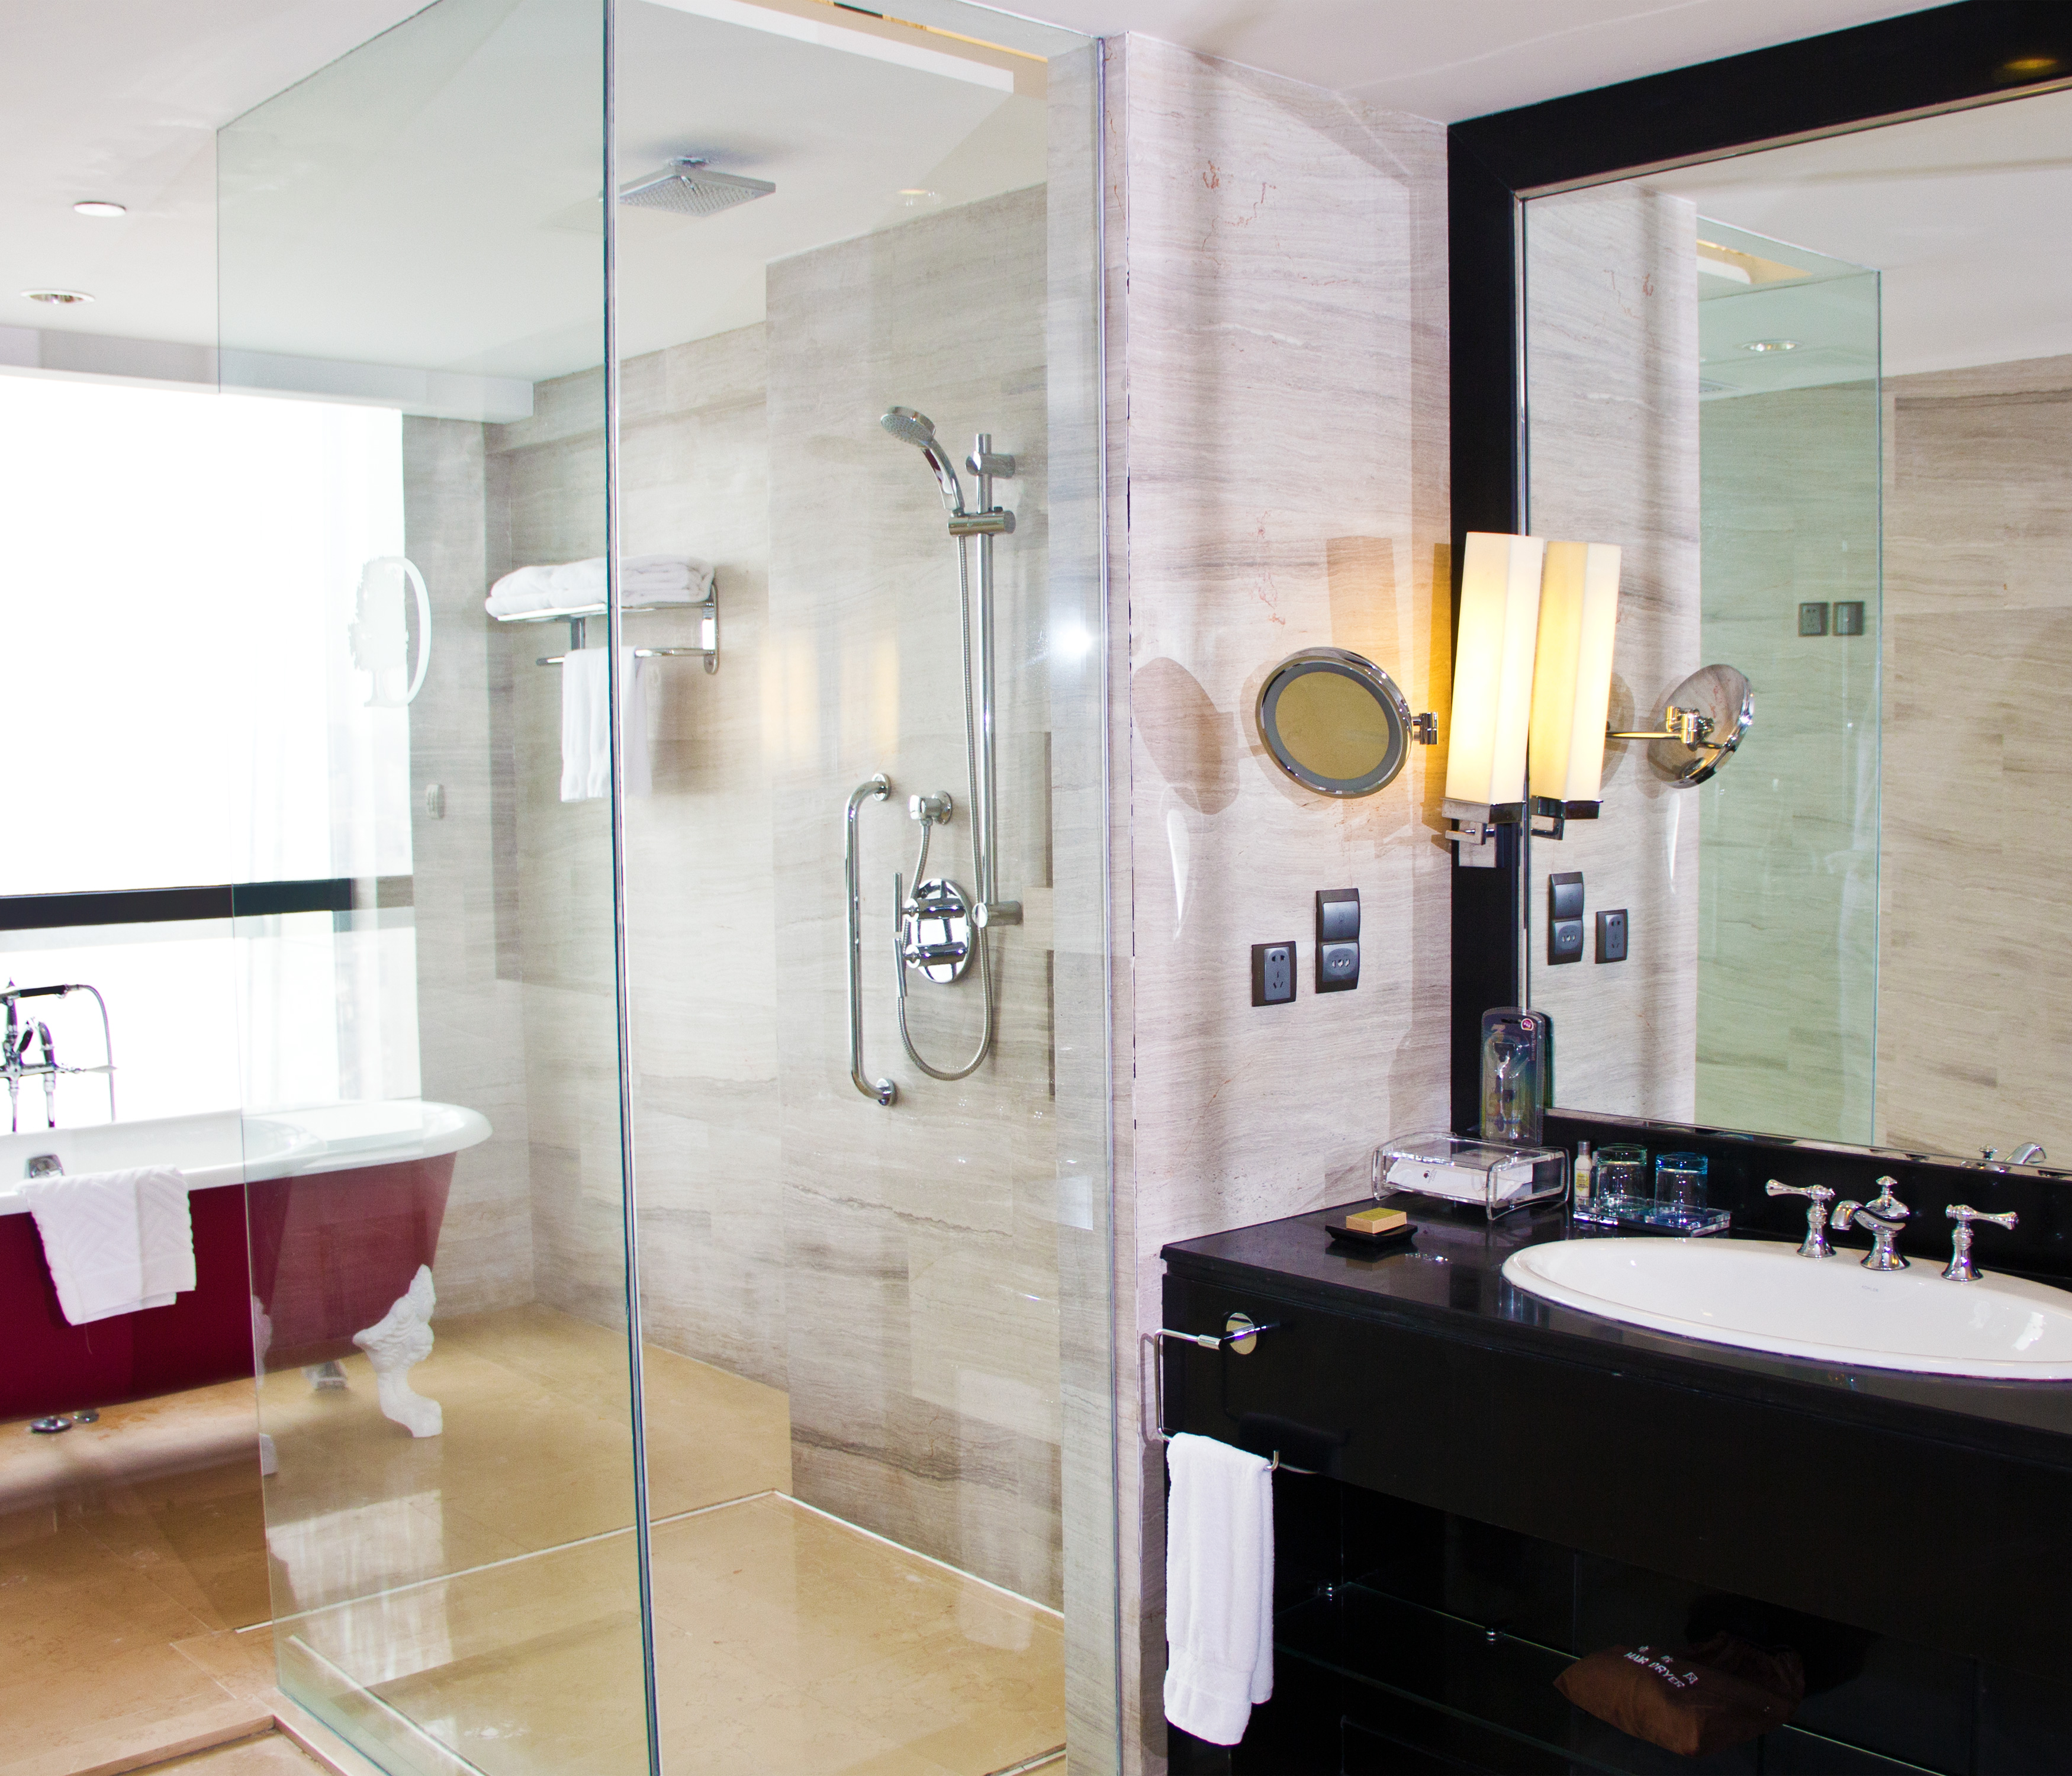 Executive suite bathroom with walk-in shower, tub, vanity mirror, sink, and towels